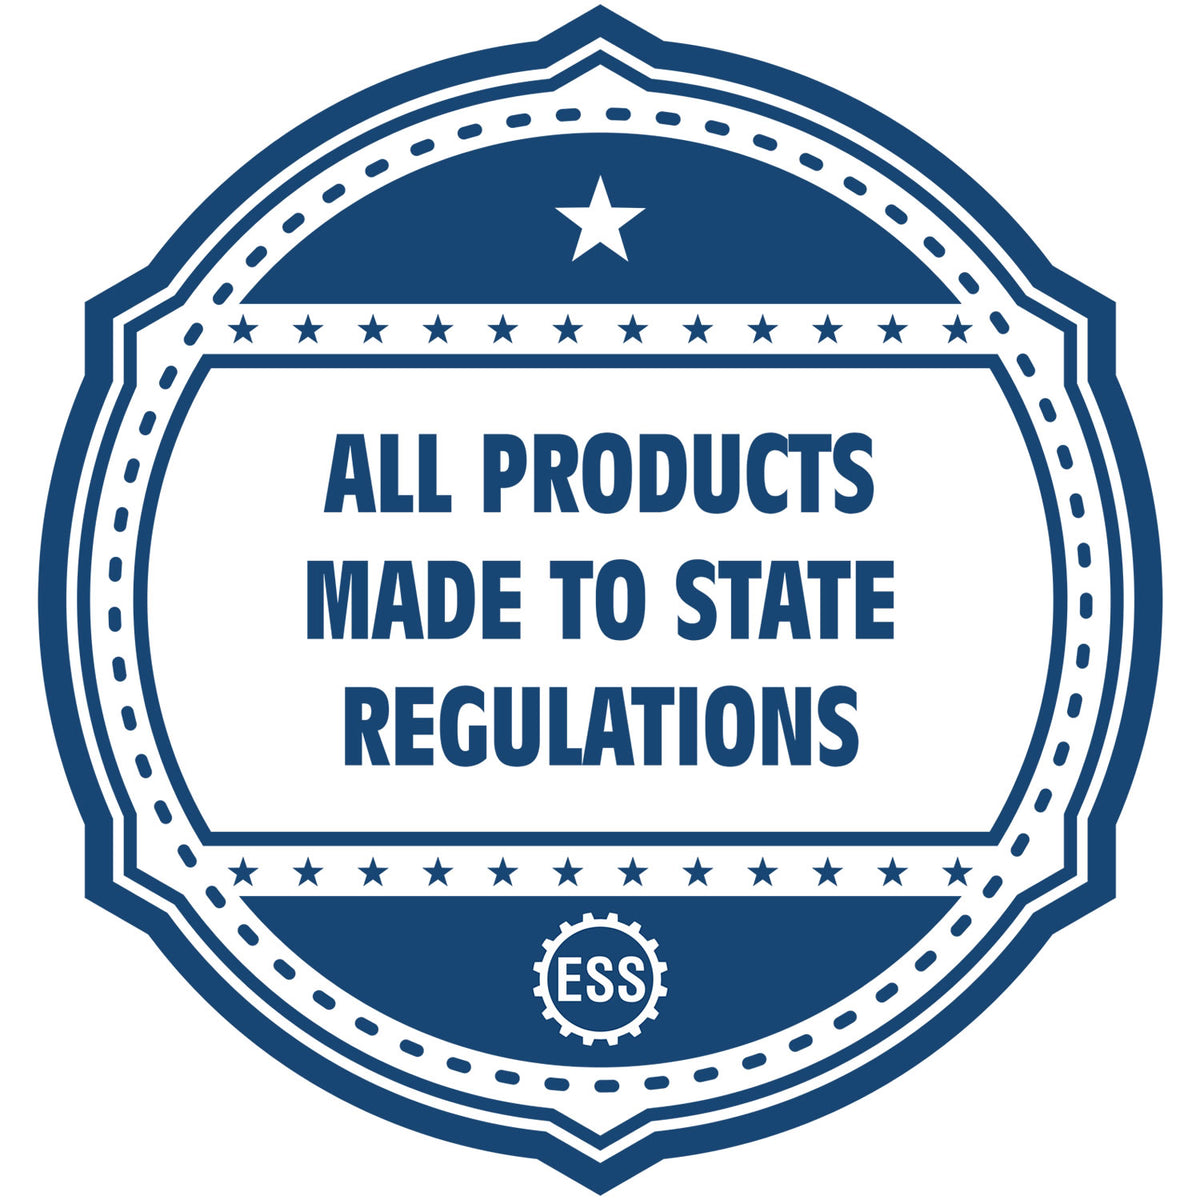 An icon or badge element for the Vermont Engineer Desk Seal showing that this product is made in compliance with state regulations.